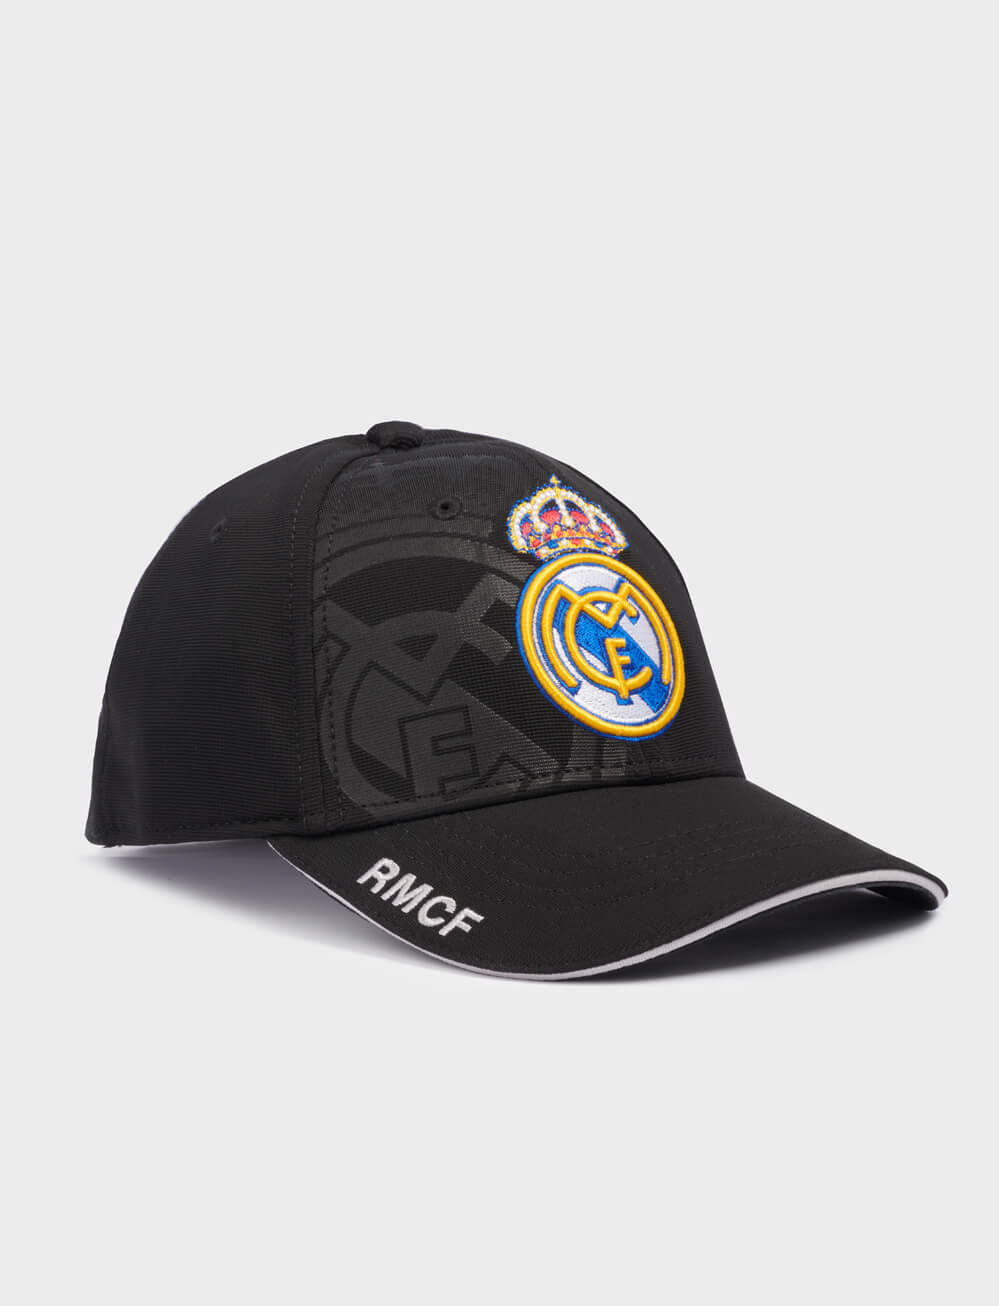 Official Real Madrid Cap - Black - The World Football Store